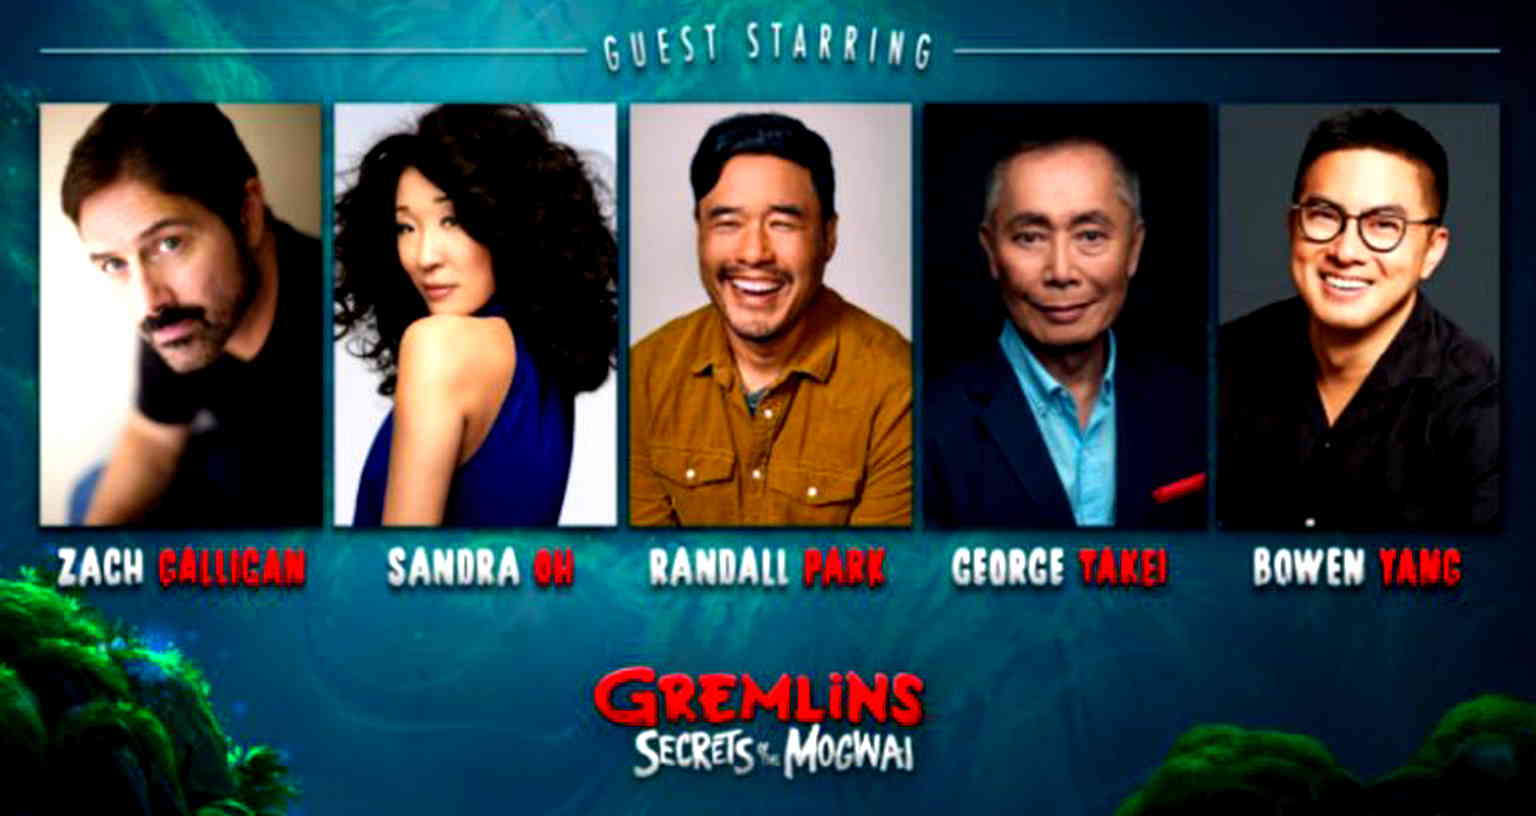 Sandra Oh, Randall Park, George Takei and Bowen Yang added to Asian American star lineup of ‘Gremlins’ prequel series